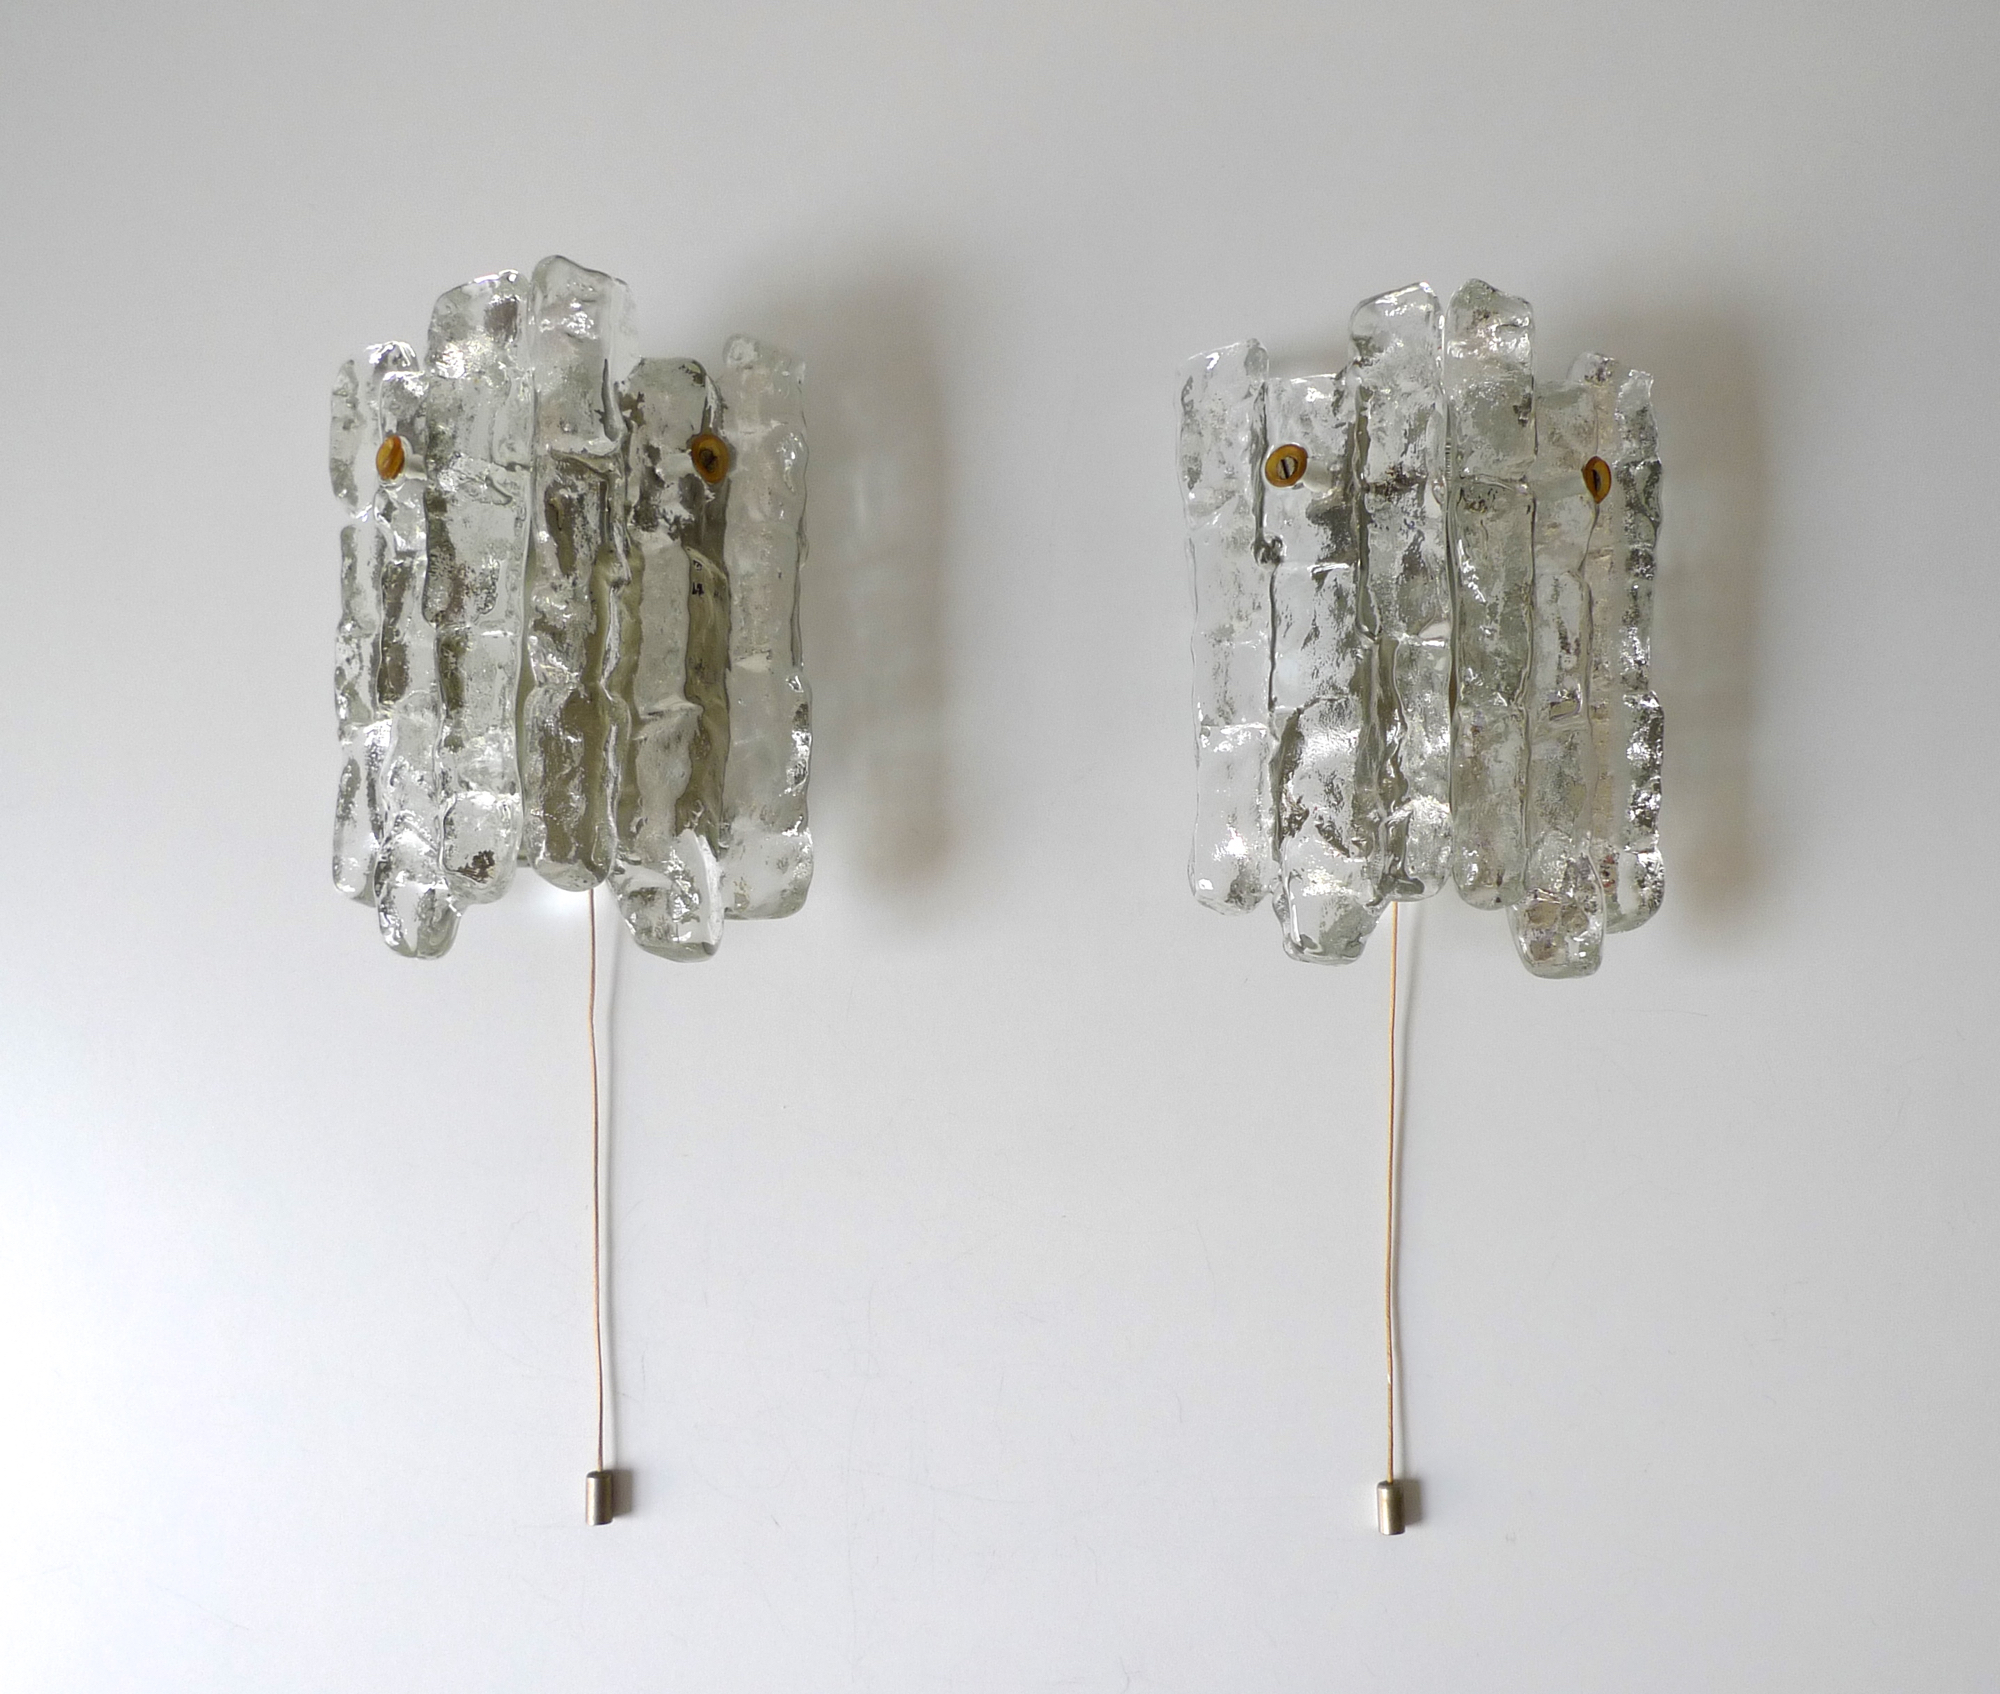 PAIR OF KALMAR ICICLE SCONCES / WALL LIGHTS, c.1960s